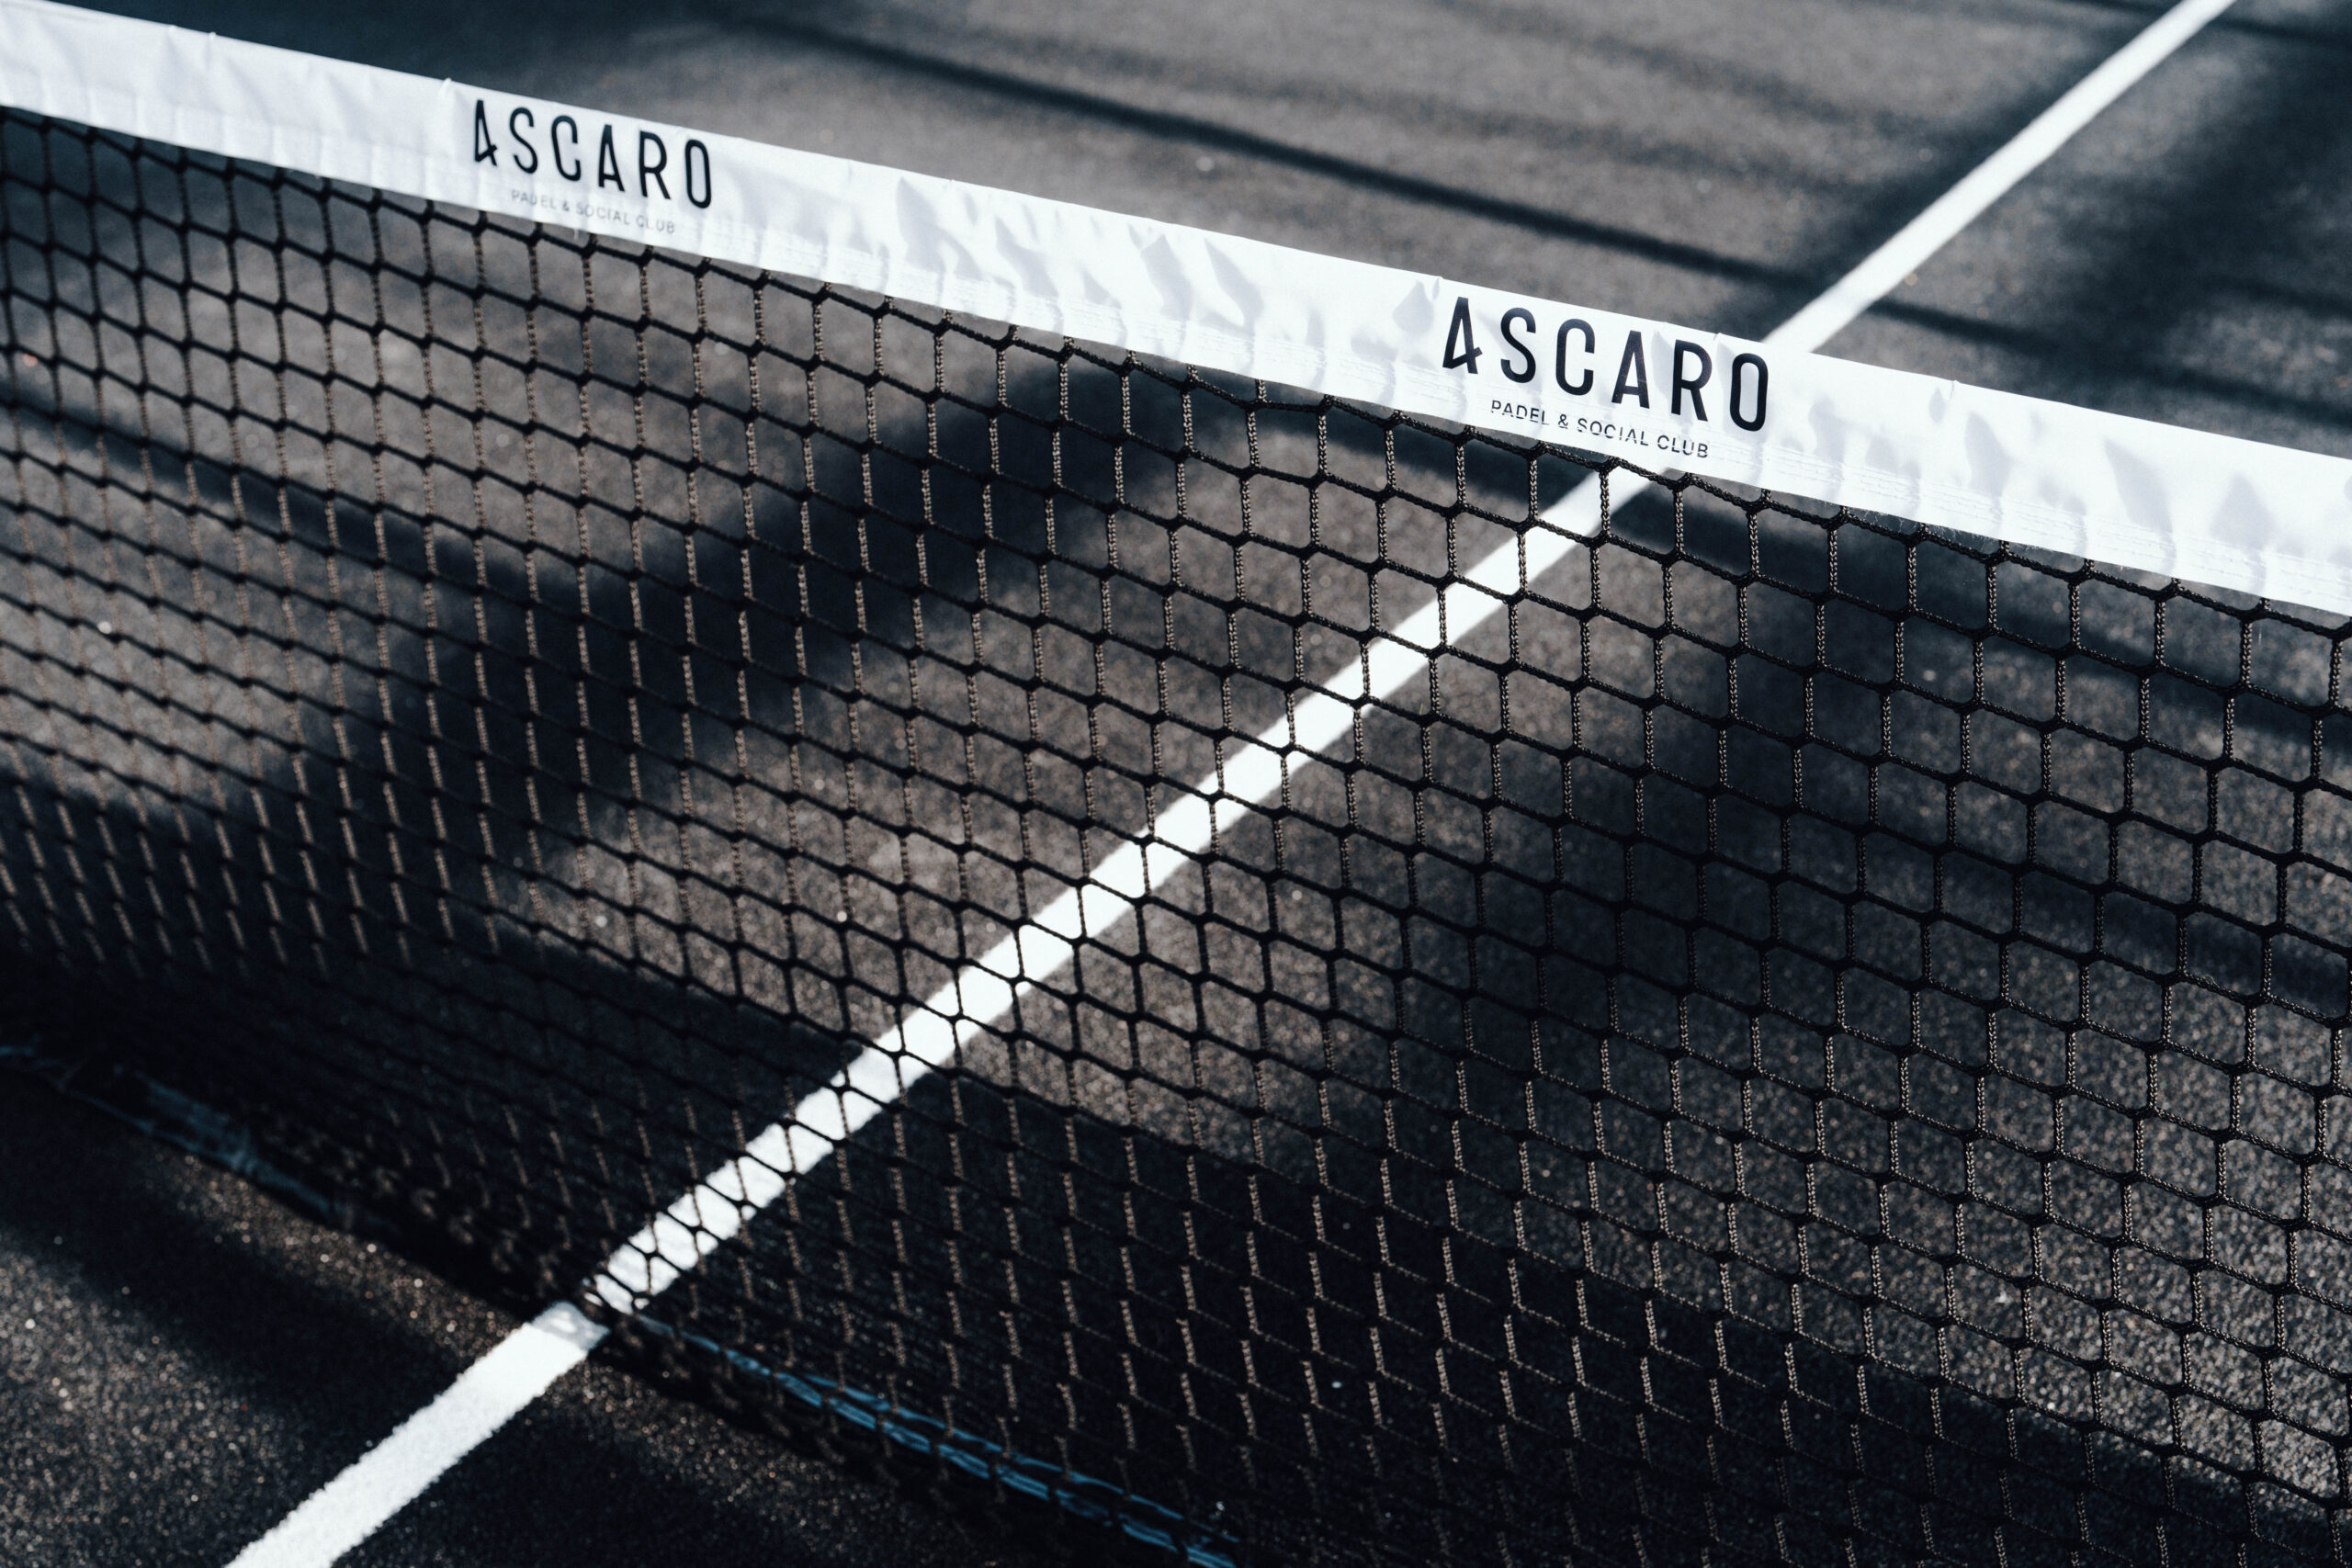 Ascaro padel & social club serving up fun and uniqueness in kl | weirdkaya